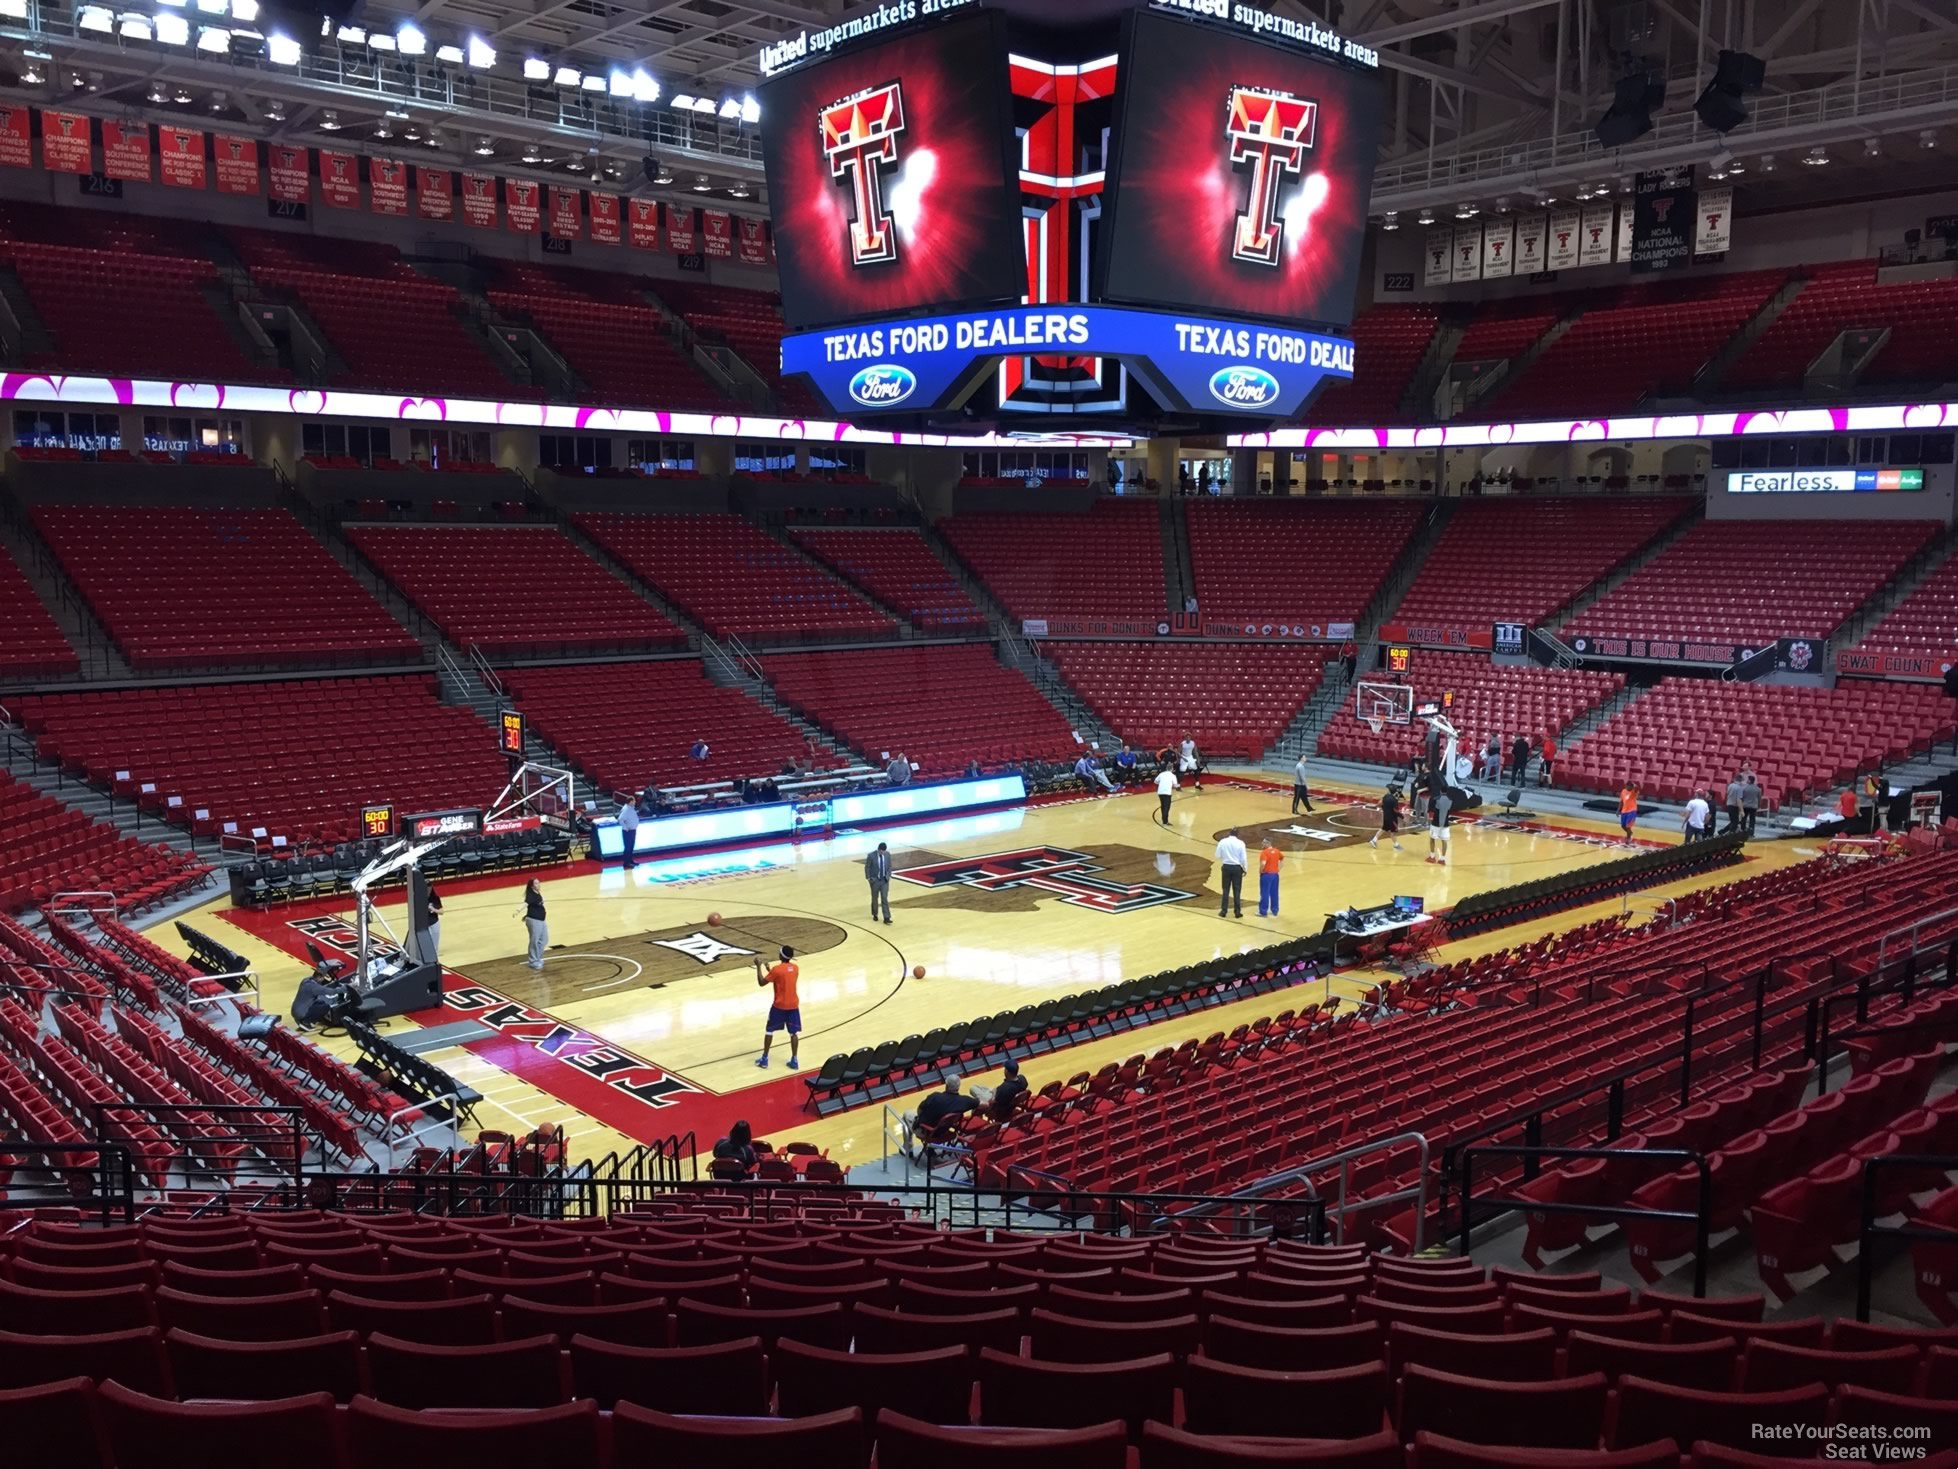 section 104, row 25 seat view  - united supermarkets arena